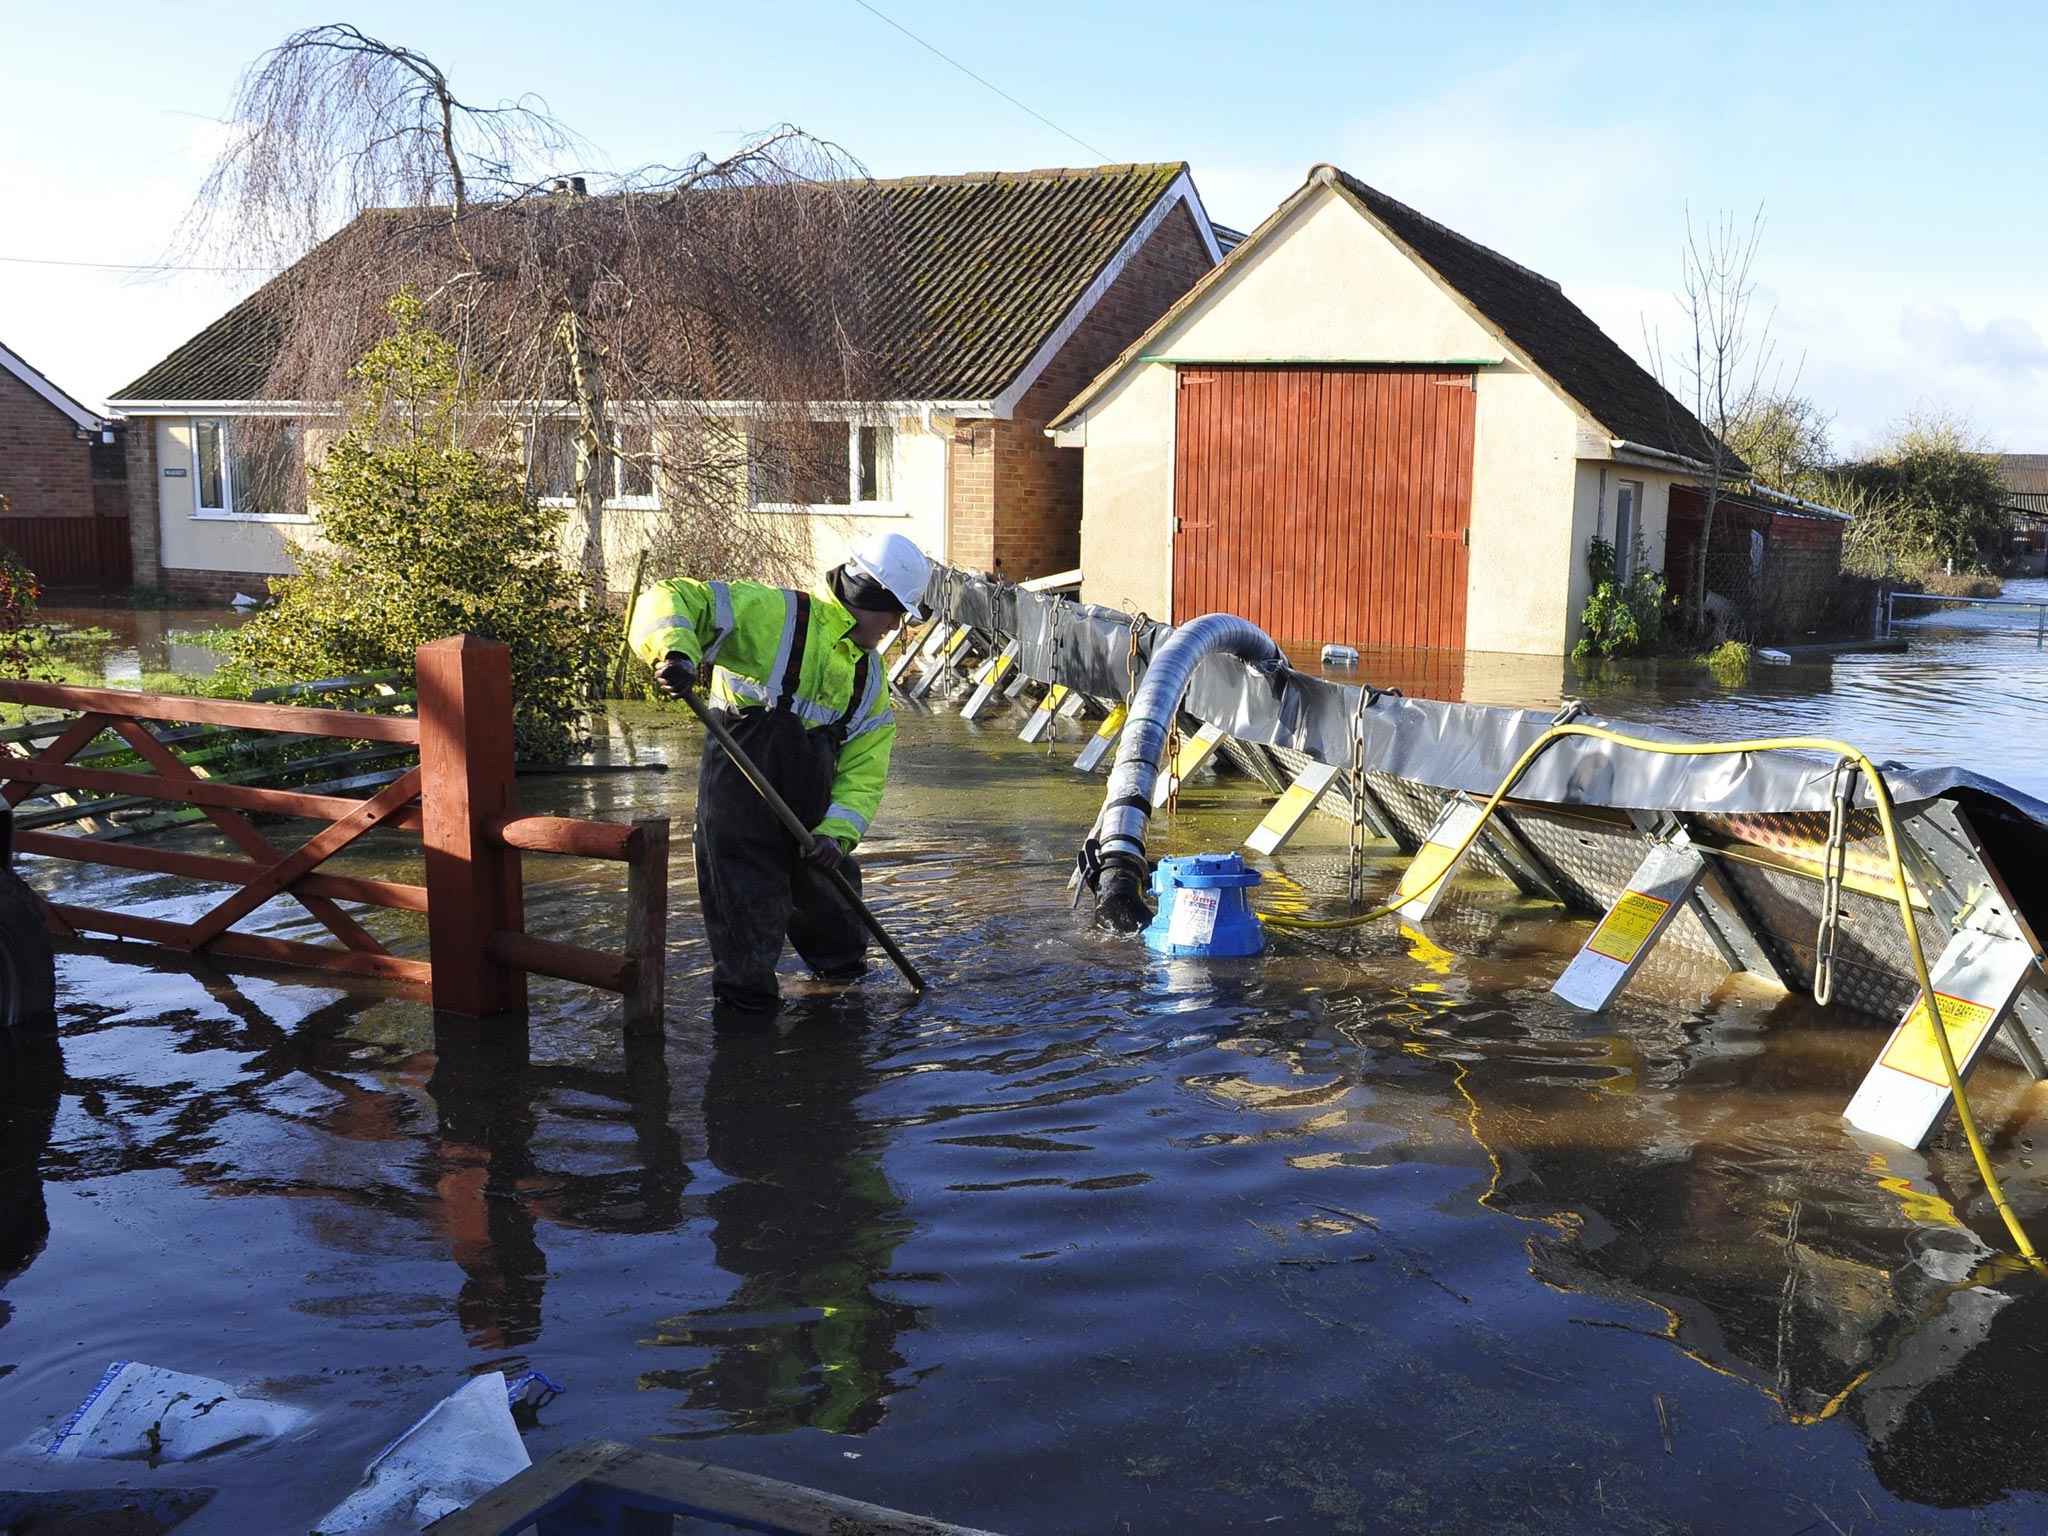 A member of the emergency services installing flood defences in the village of Moorland on the Somerset Level